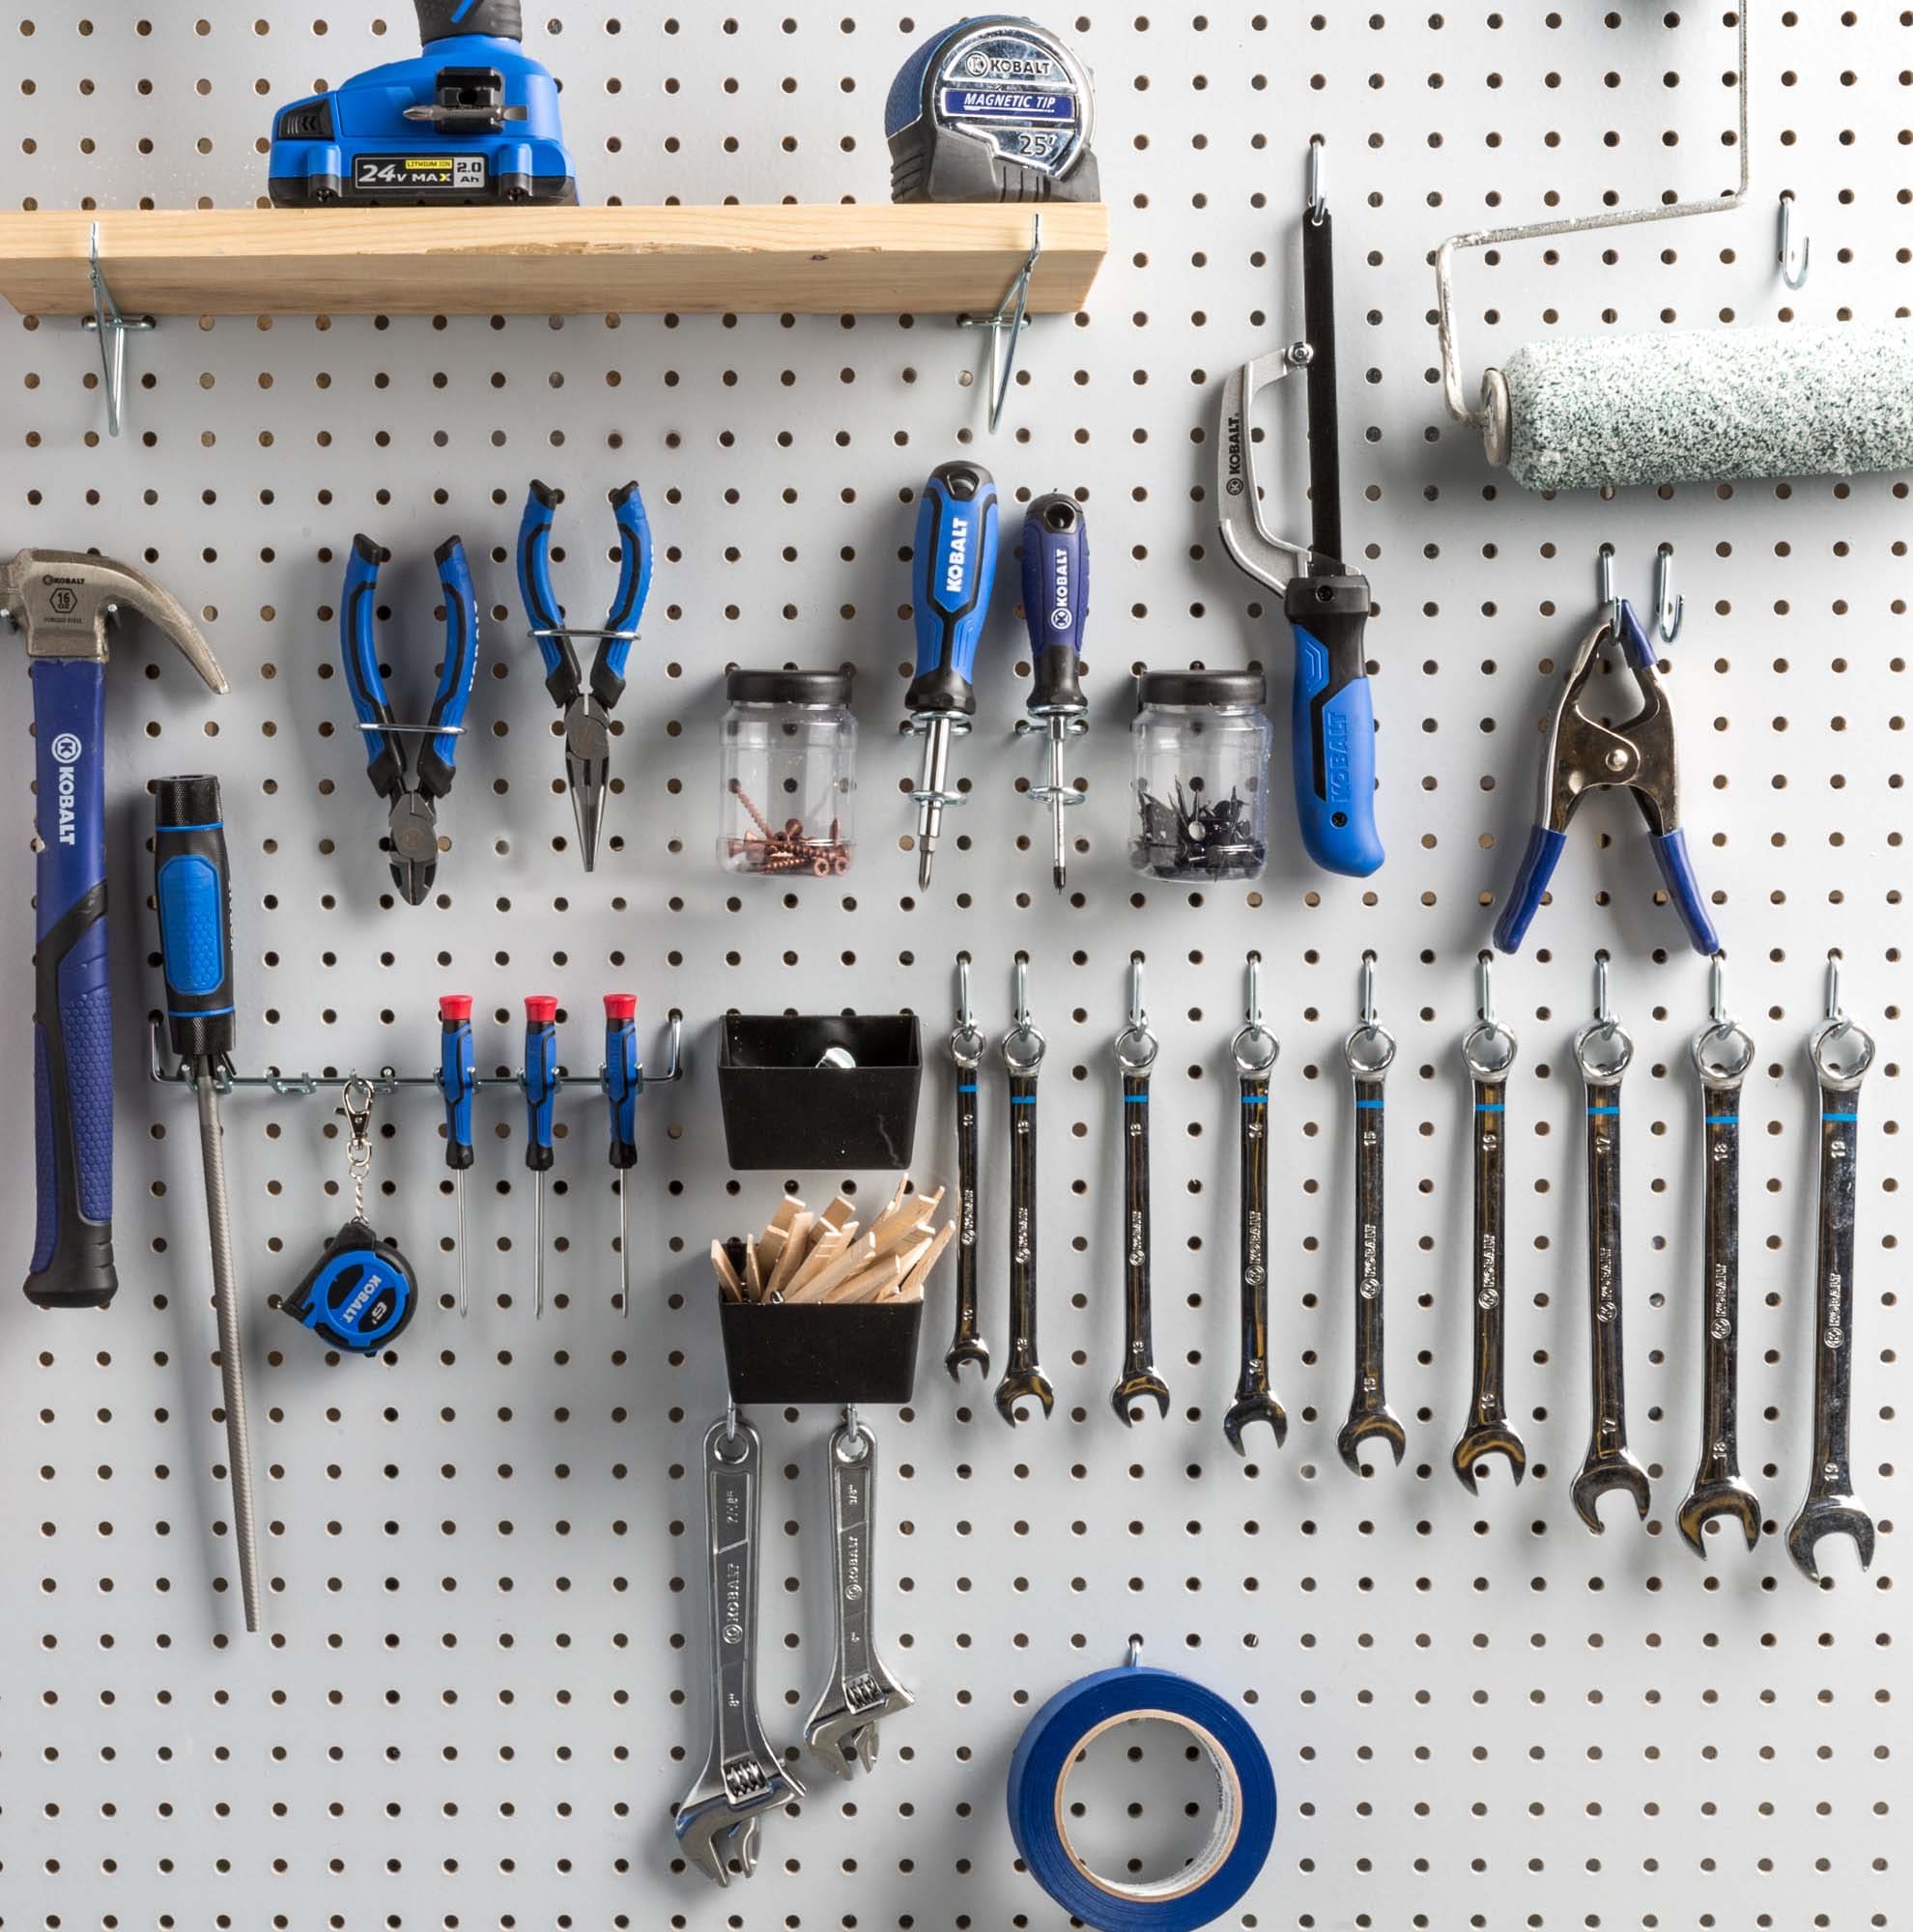 Euro Pegboard] Bosch Professional 12 V Tool Holder by Hans